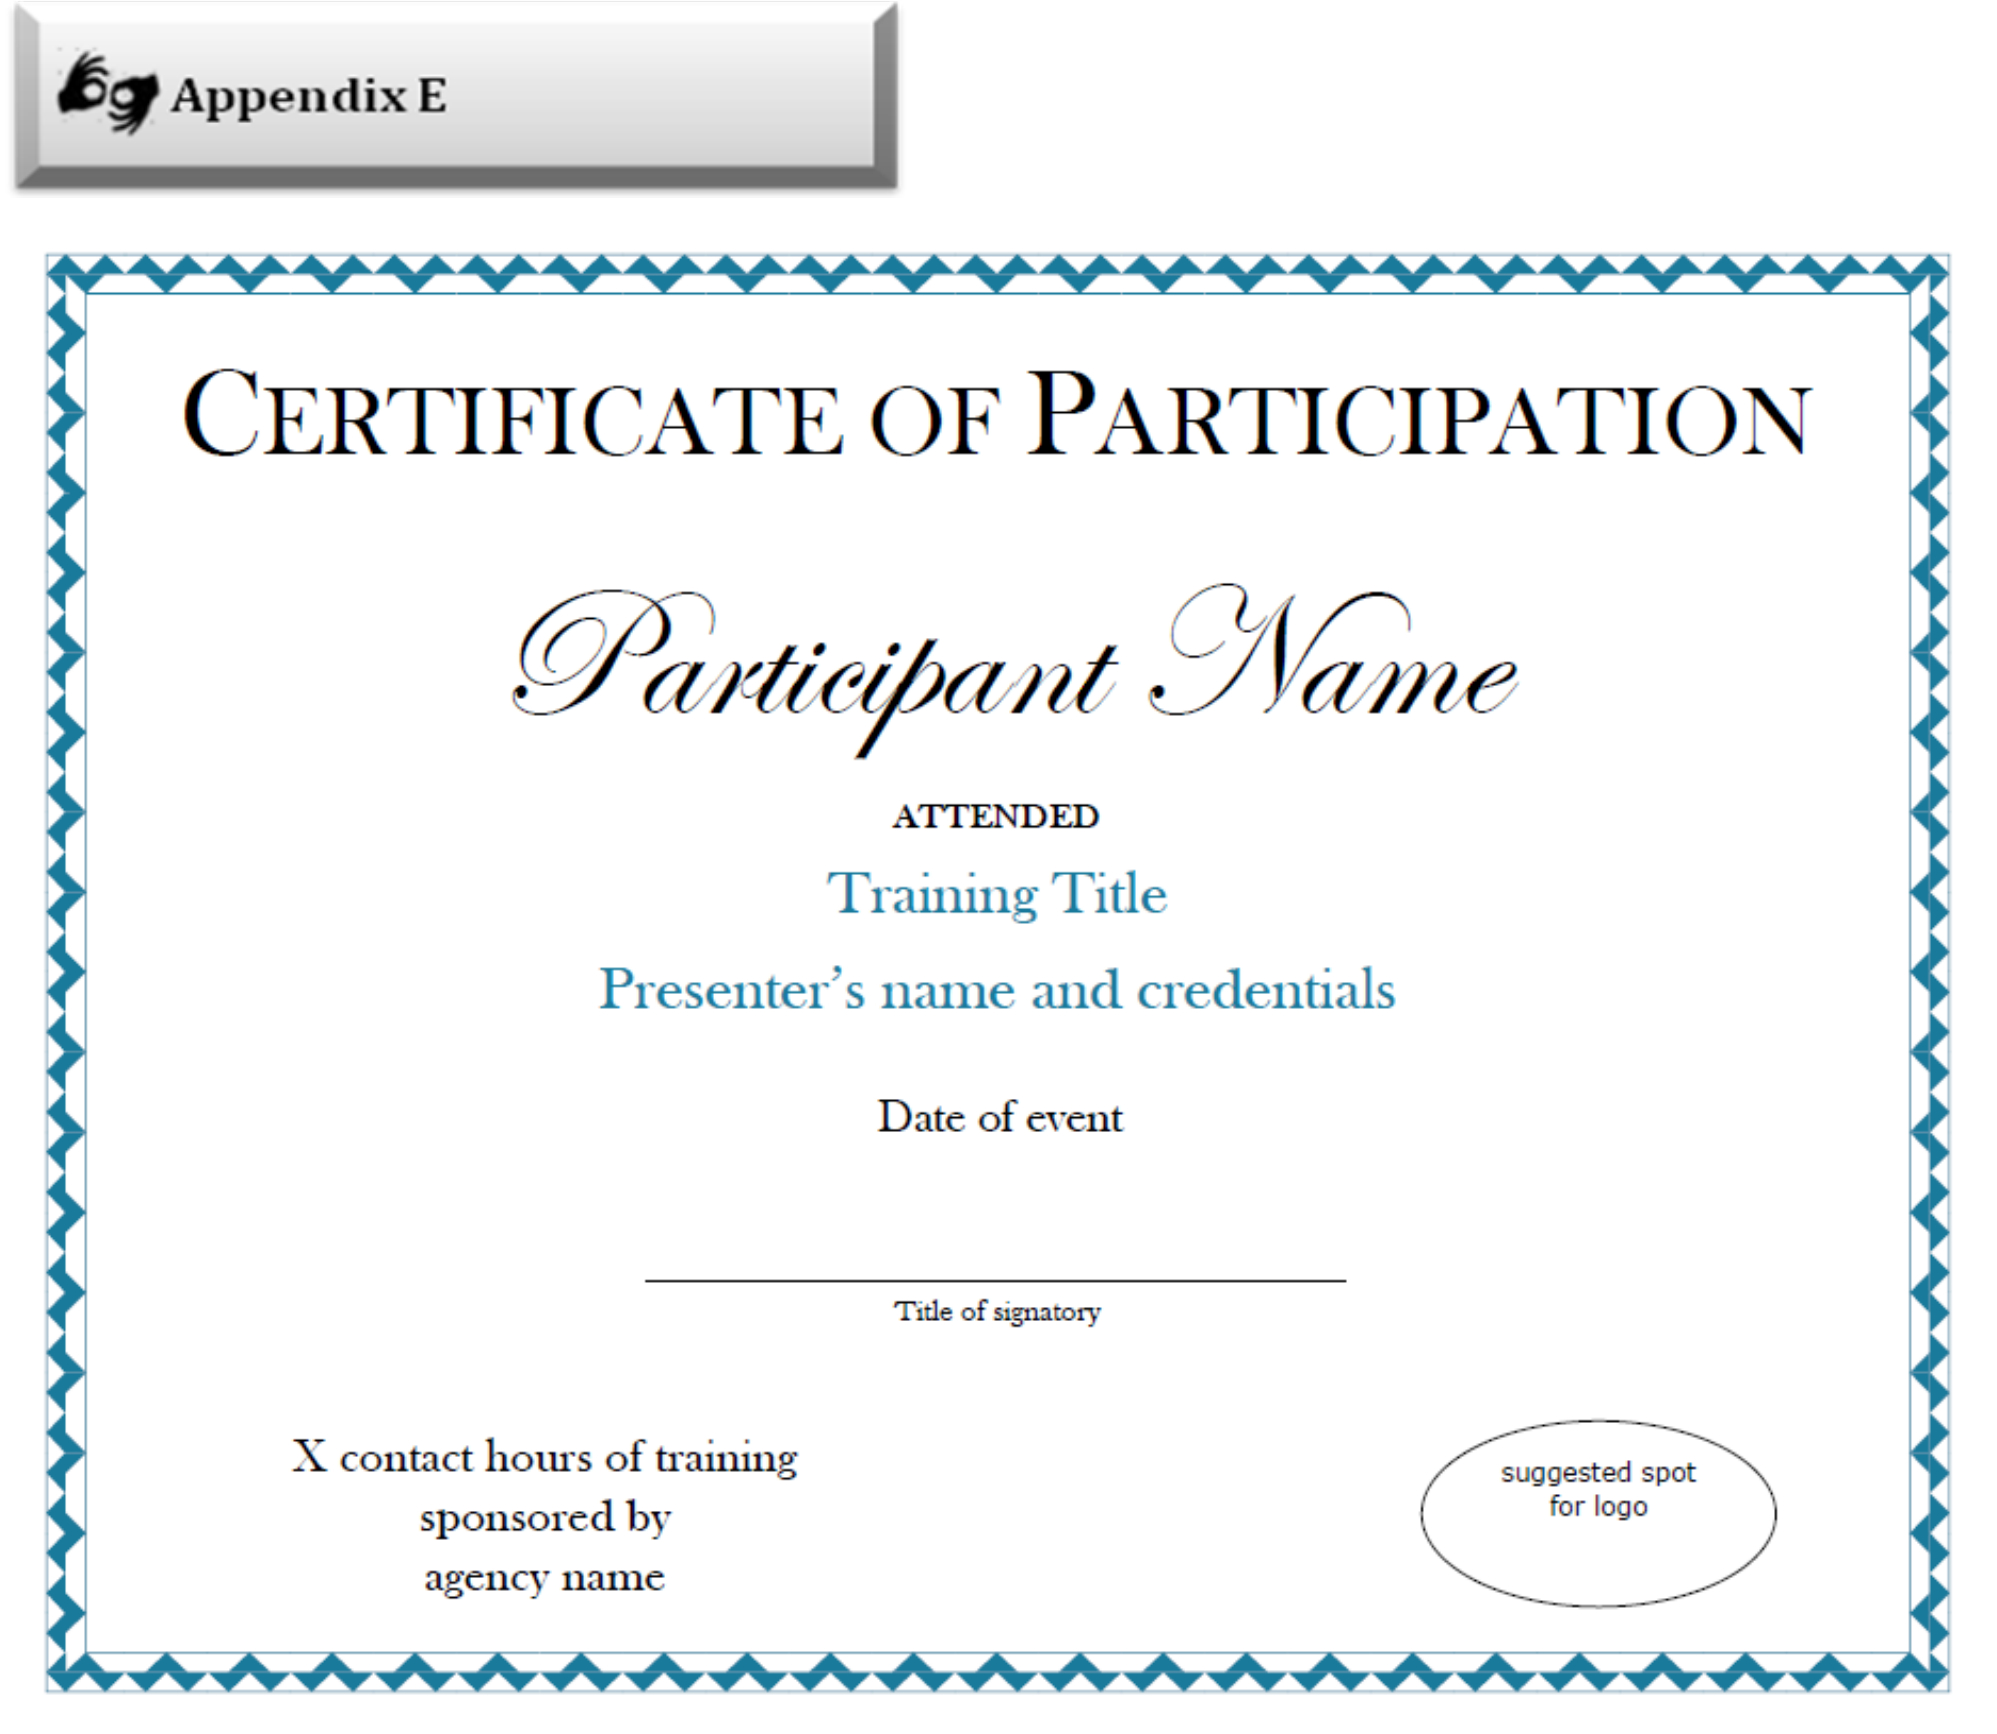 Certificate Of Participation Sample Free Download With Certificate Of Participation Template Pdf